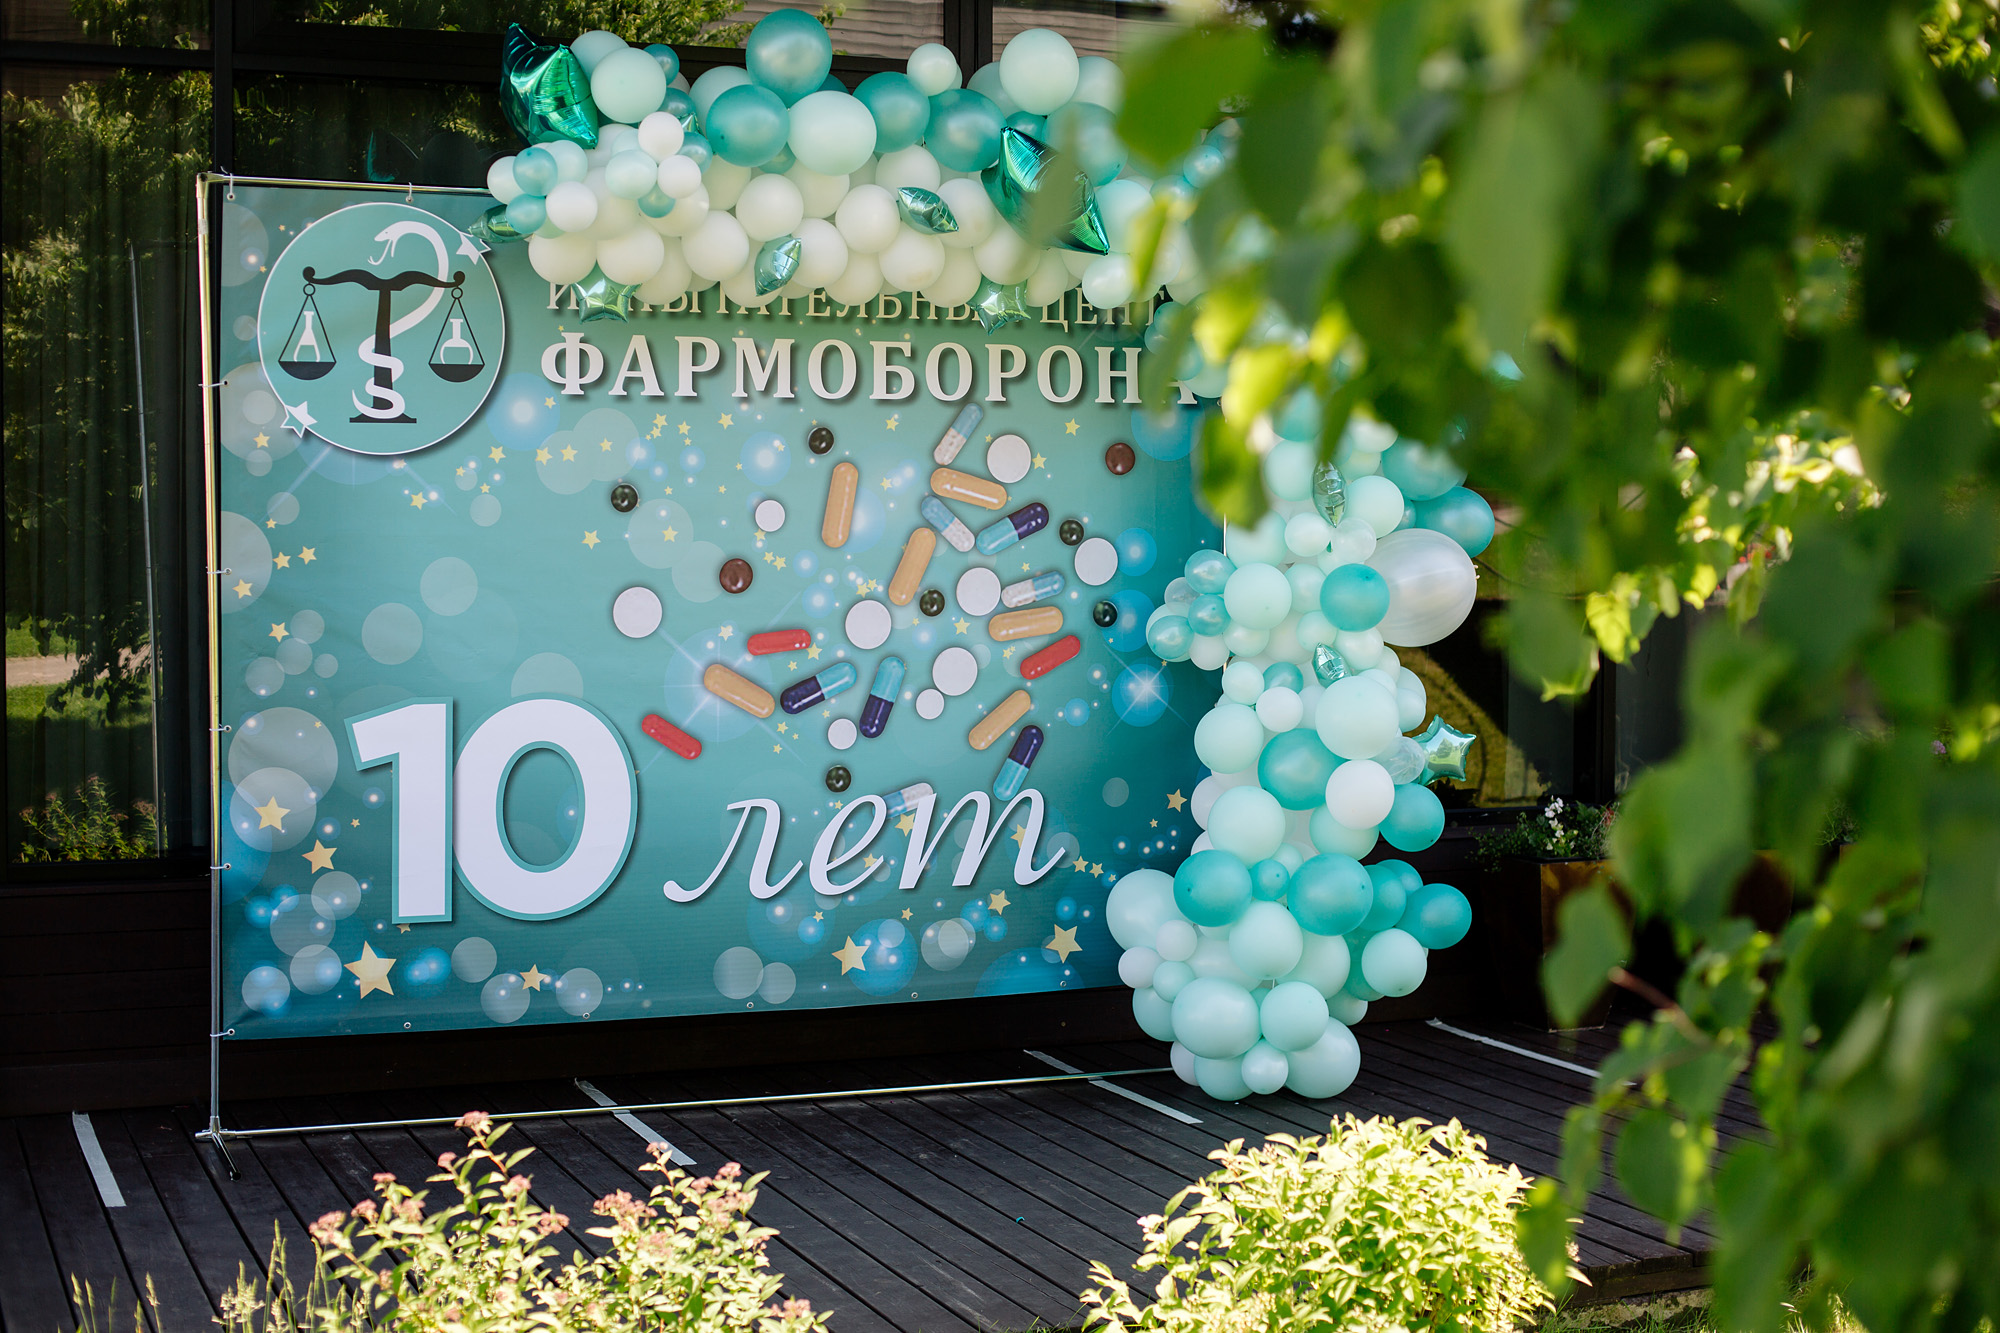 Photos from the anniversary of the company dedicated to the 10th anniversary of Farmoborona Test Center, Ltd.